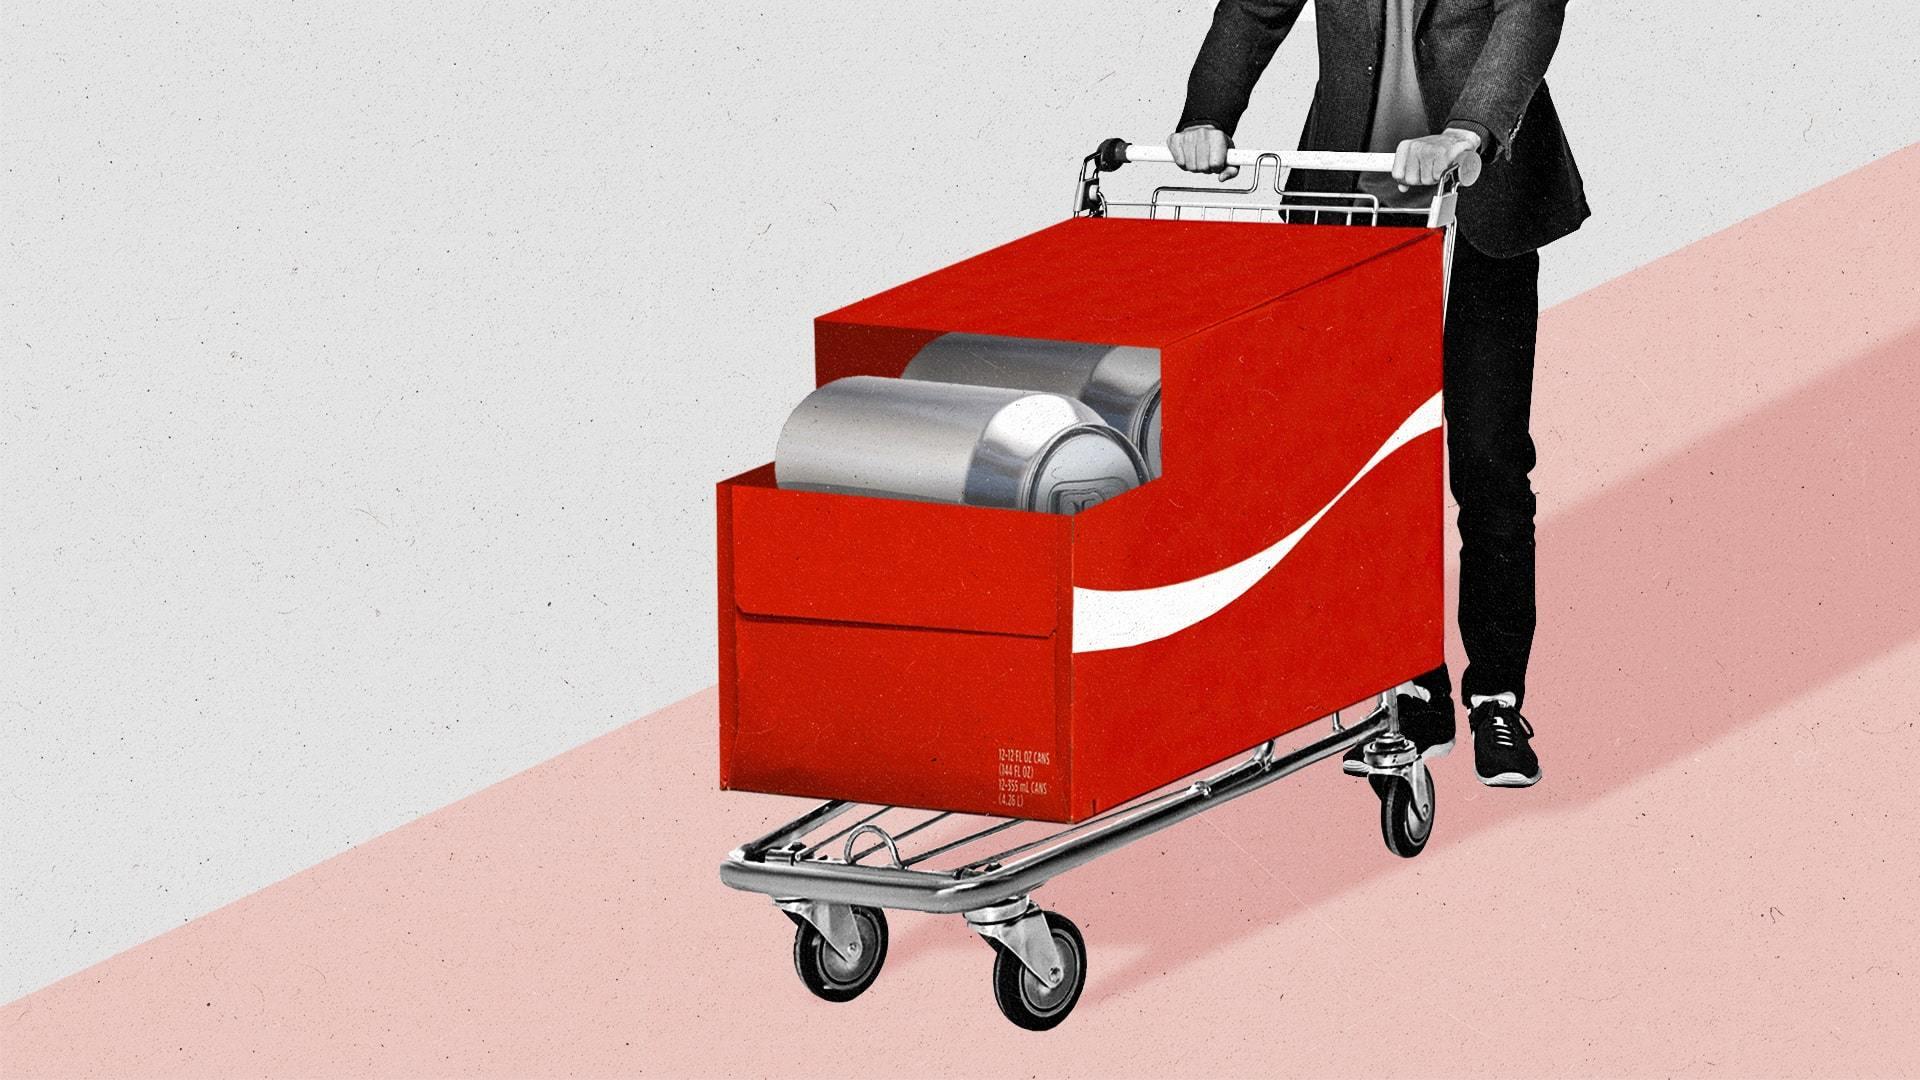 An oversized red box of soda cans, complete with shopping cart wheels, a handlebar, and a white ribbon graphic, is pushed by a man in a suit.